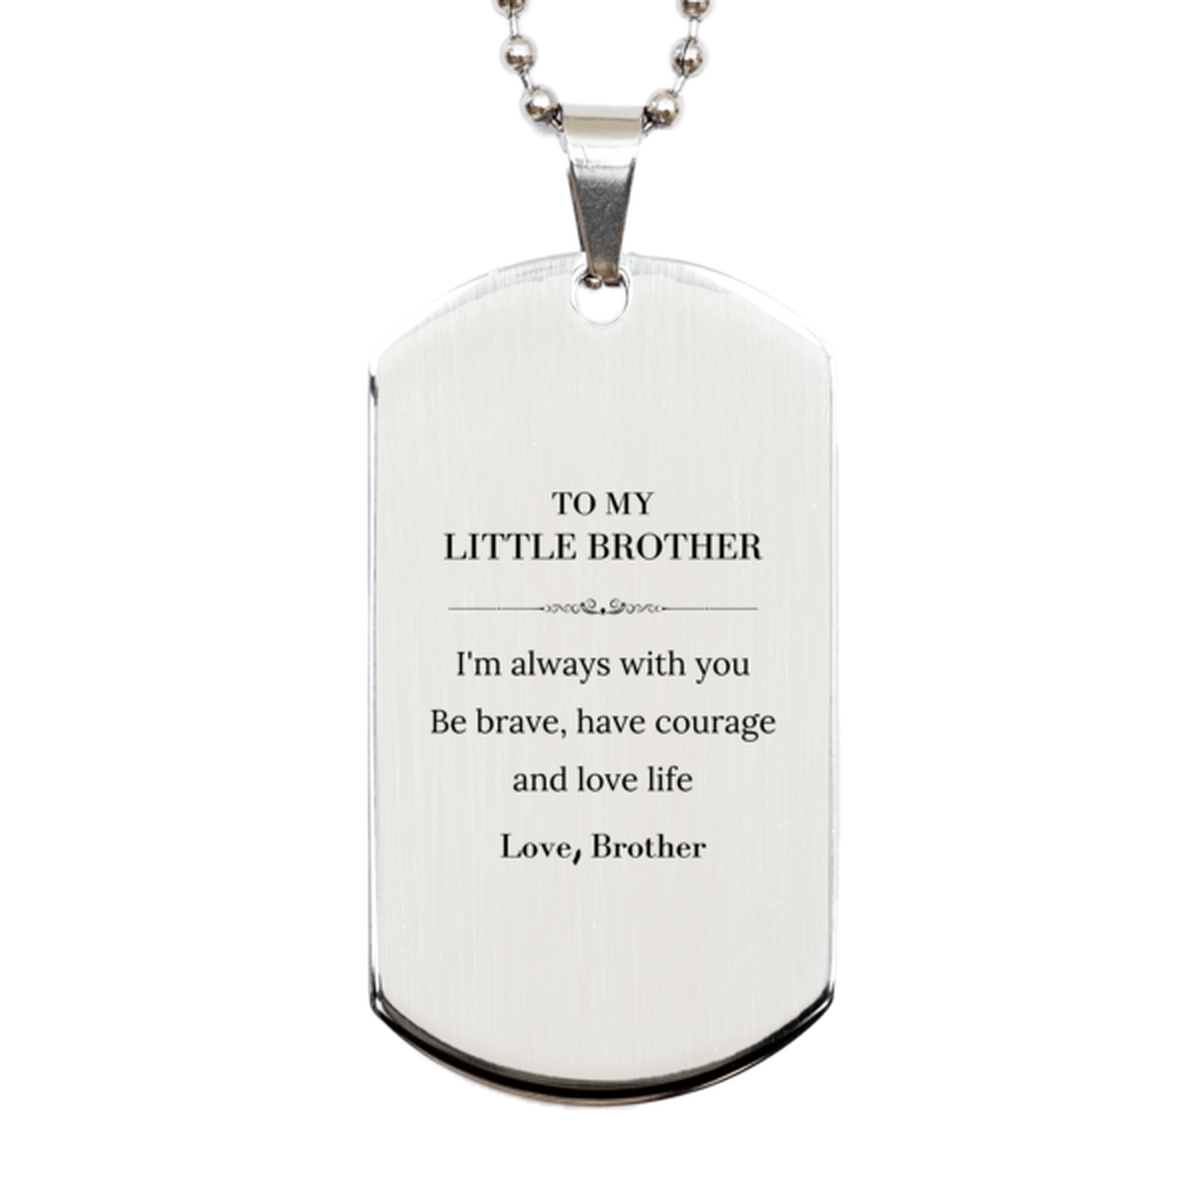 To My Little Brother Gifts from Brother, Unique Silver Dog Tag Inspirational Christmas Birthday Graduation Gifts for Little Brother I'm always with you. Be brave, have courage and love life. Love, Brother